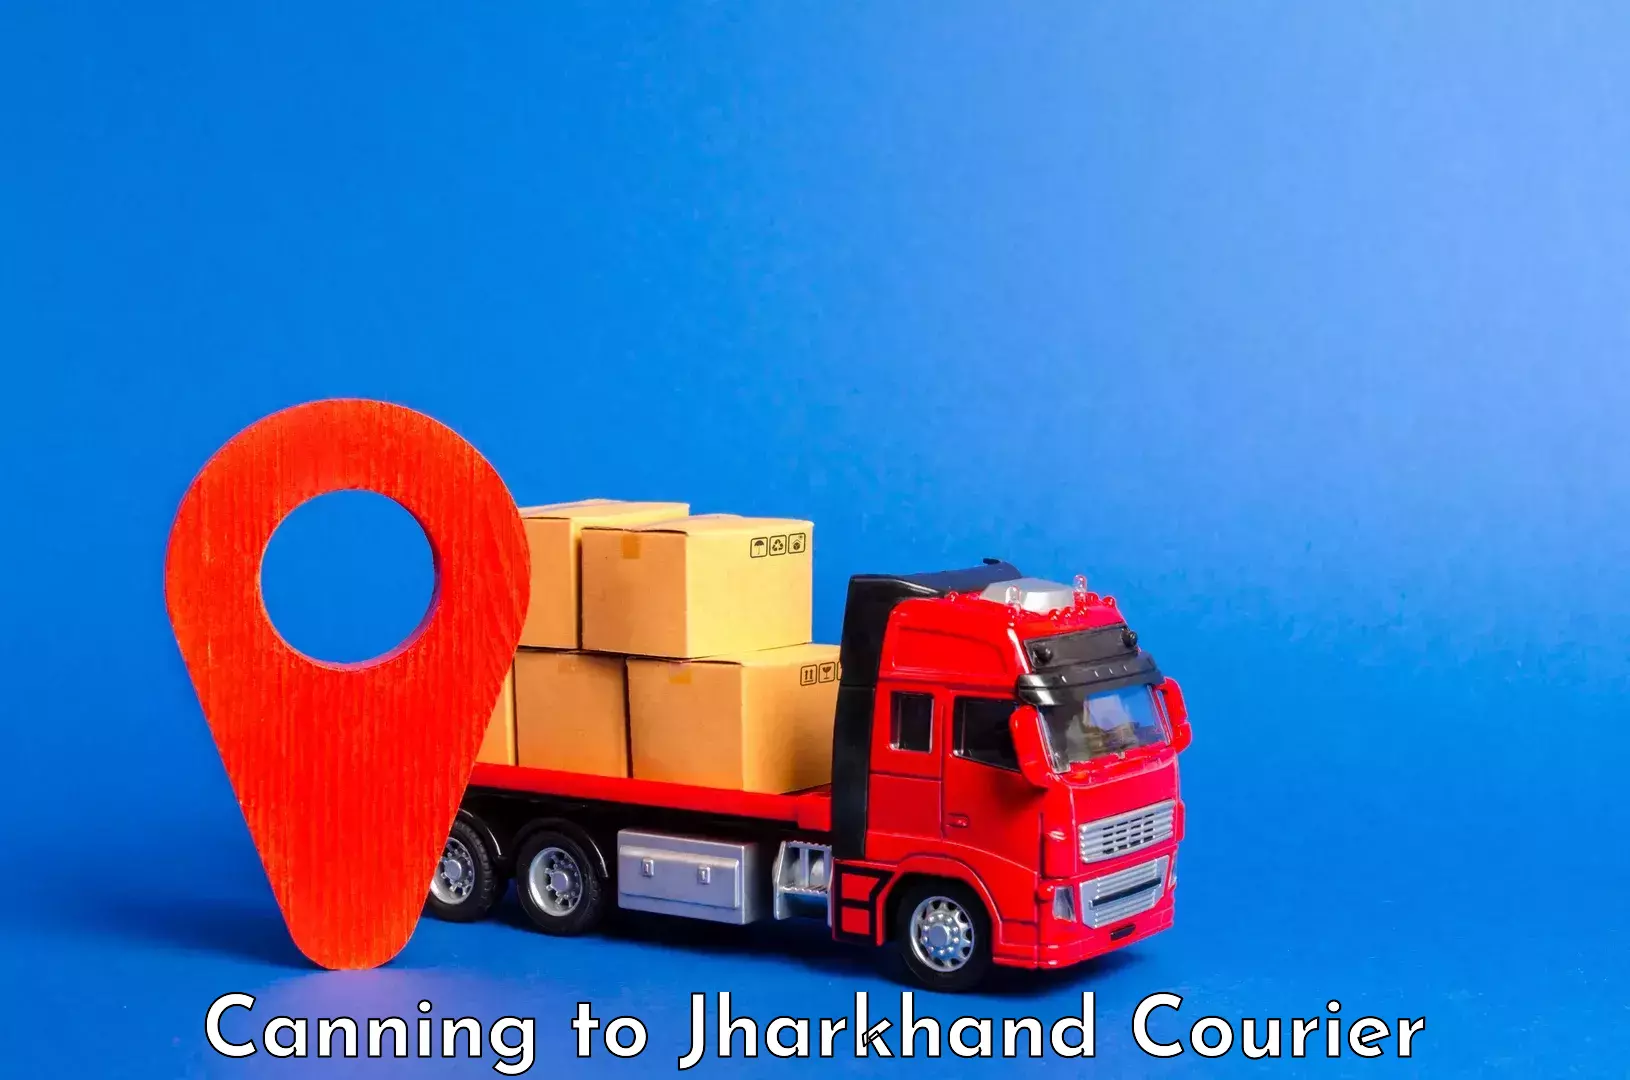 Baggage transport network Canning to Jharkhand